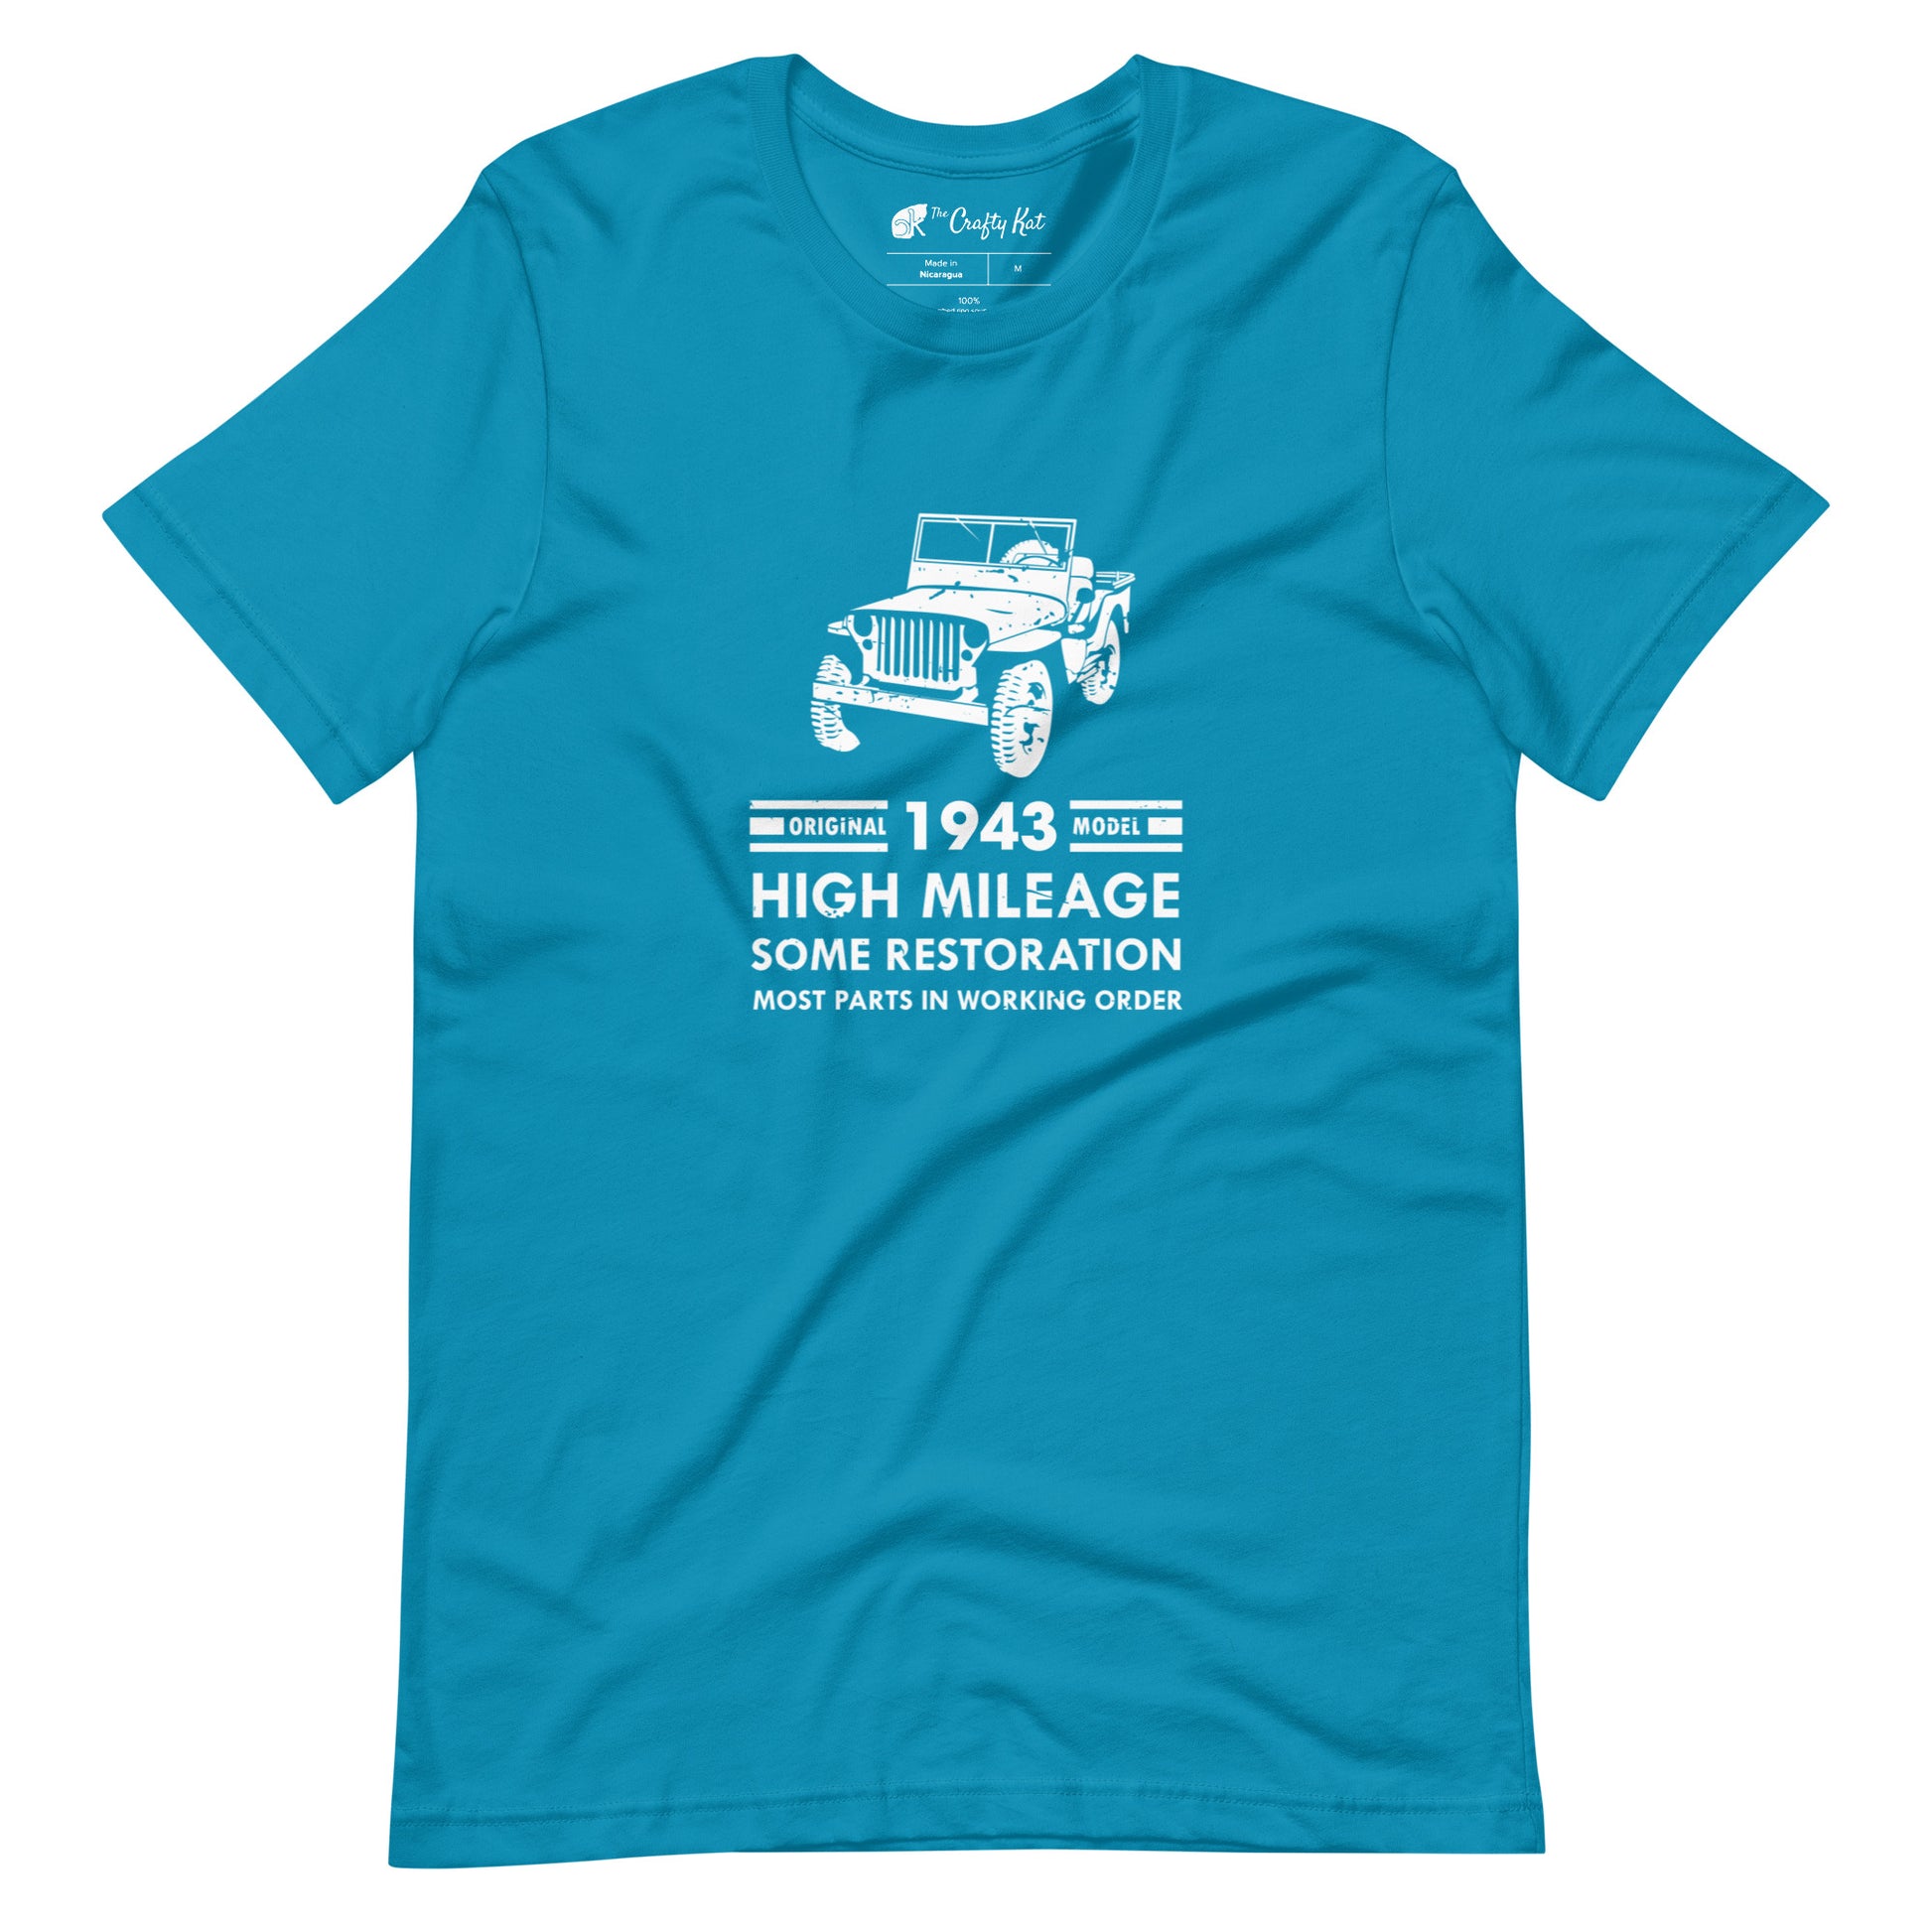 Aqua (cyan) t-shirt with distressed graphic of old military jeep and text "Original YEAR model HIGH MILEAGE some restoration MOST PARTS IN WORKING ORDER"